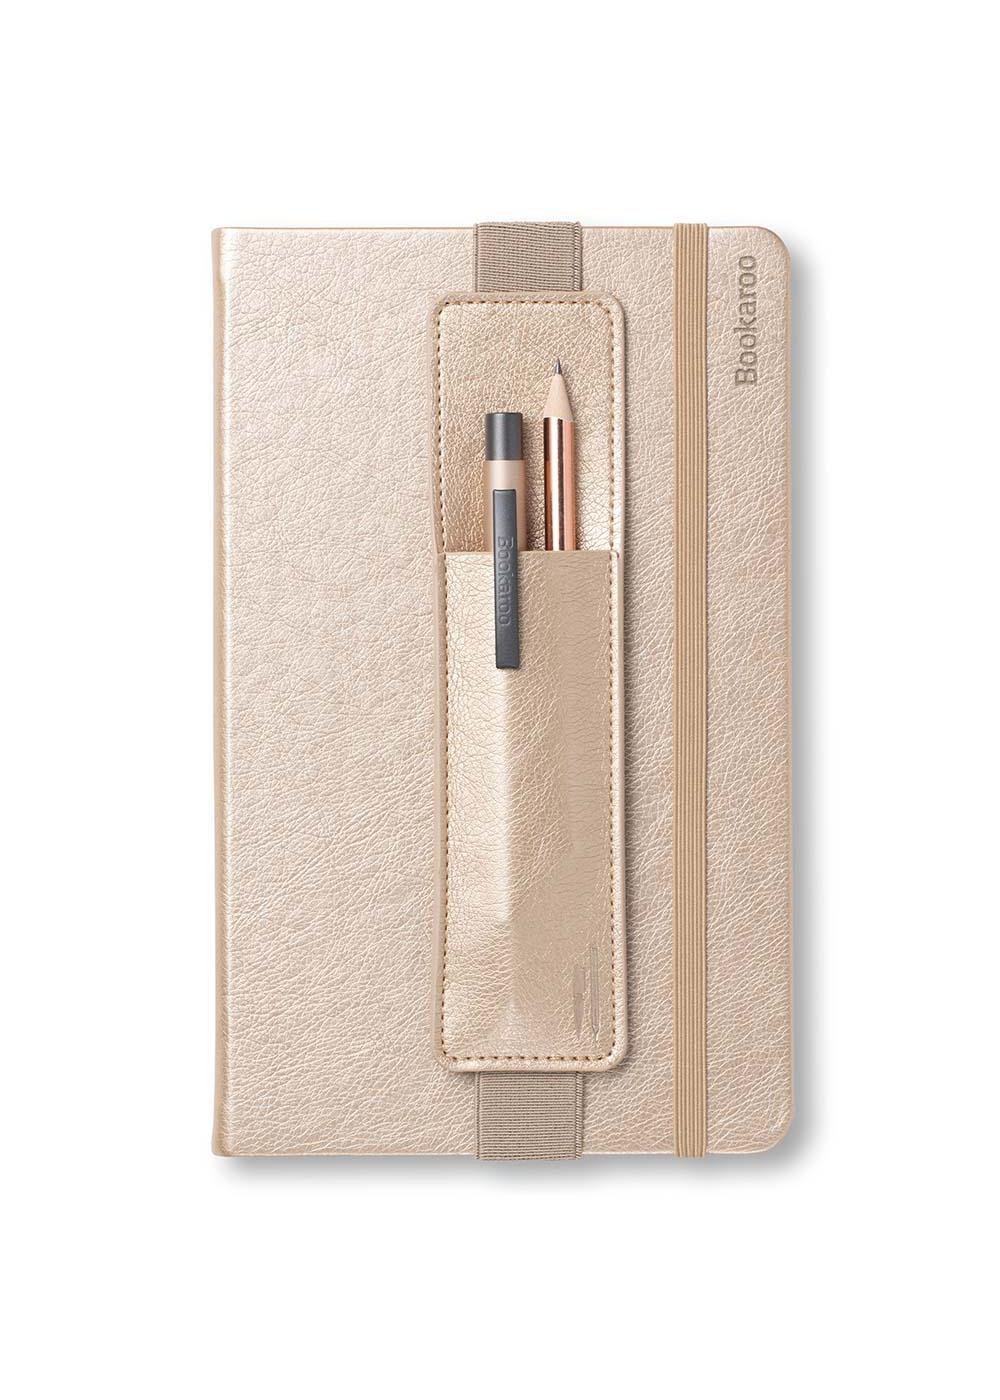 Bookaroo Pen Pouch for Notebook & Journal - Gold; image 2 of 2